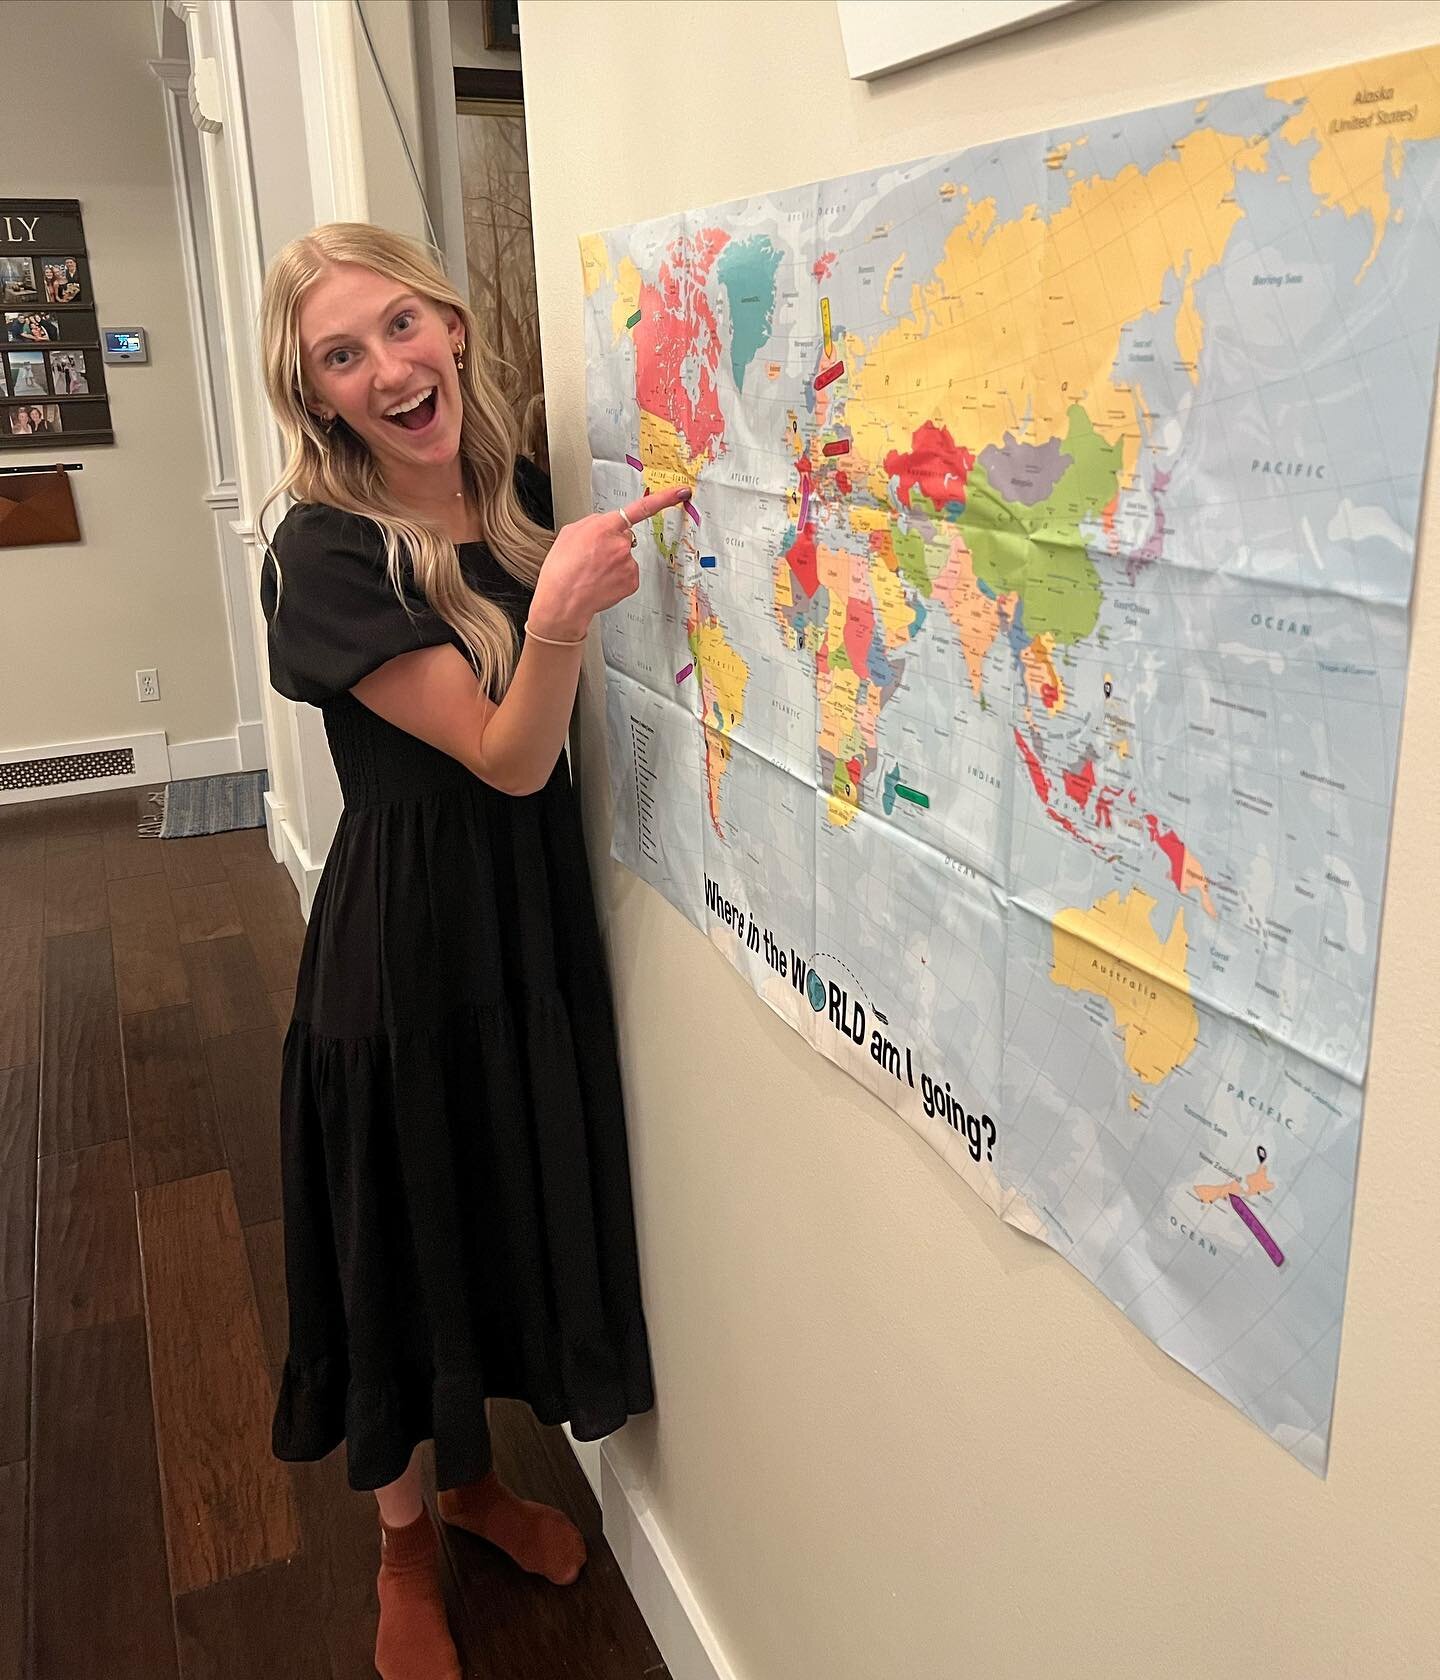 It&rsquo;s been a whirlwind 48 hours. Nataleigh will be serving in the Washington DC North area starting the beginning of September. We are thrilled for her! Feeling so grateful for the love and support for her and our family. 💗💗